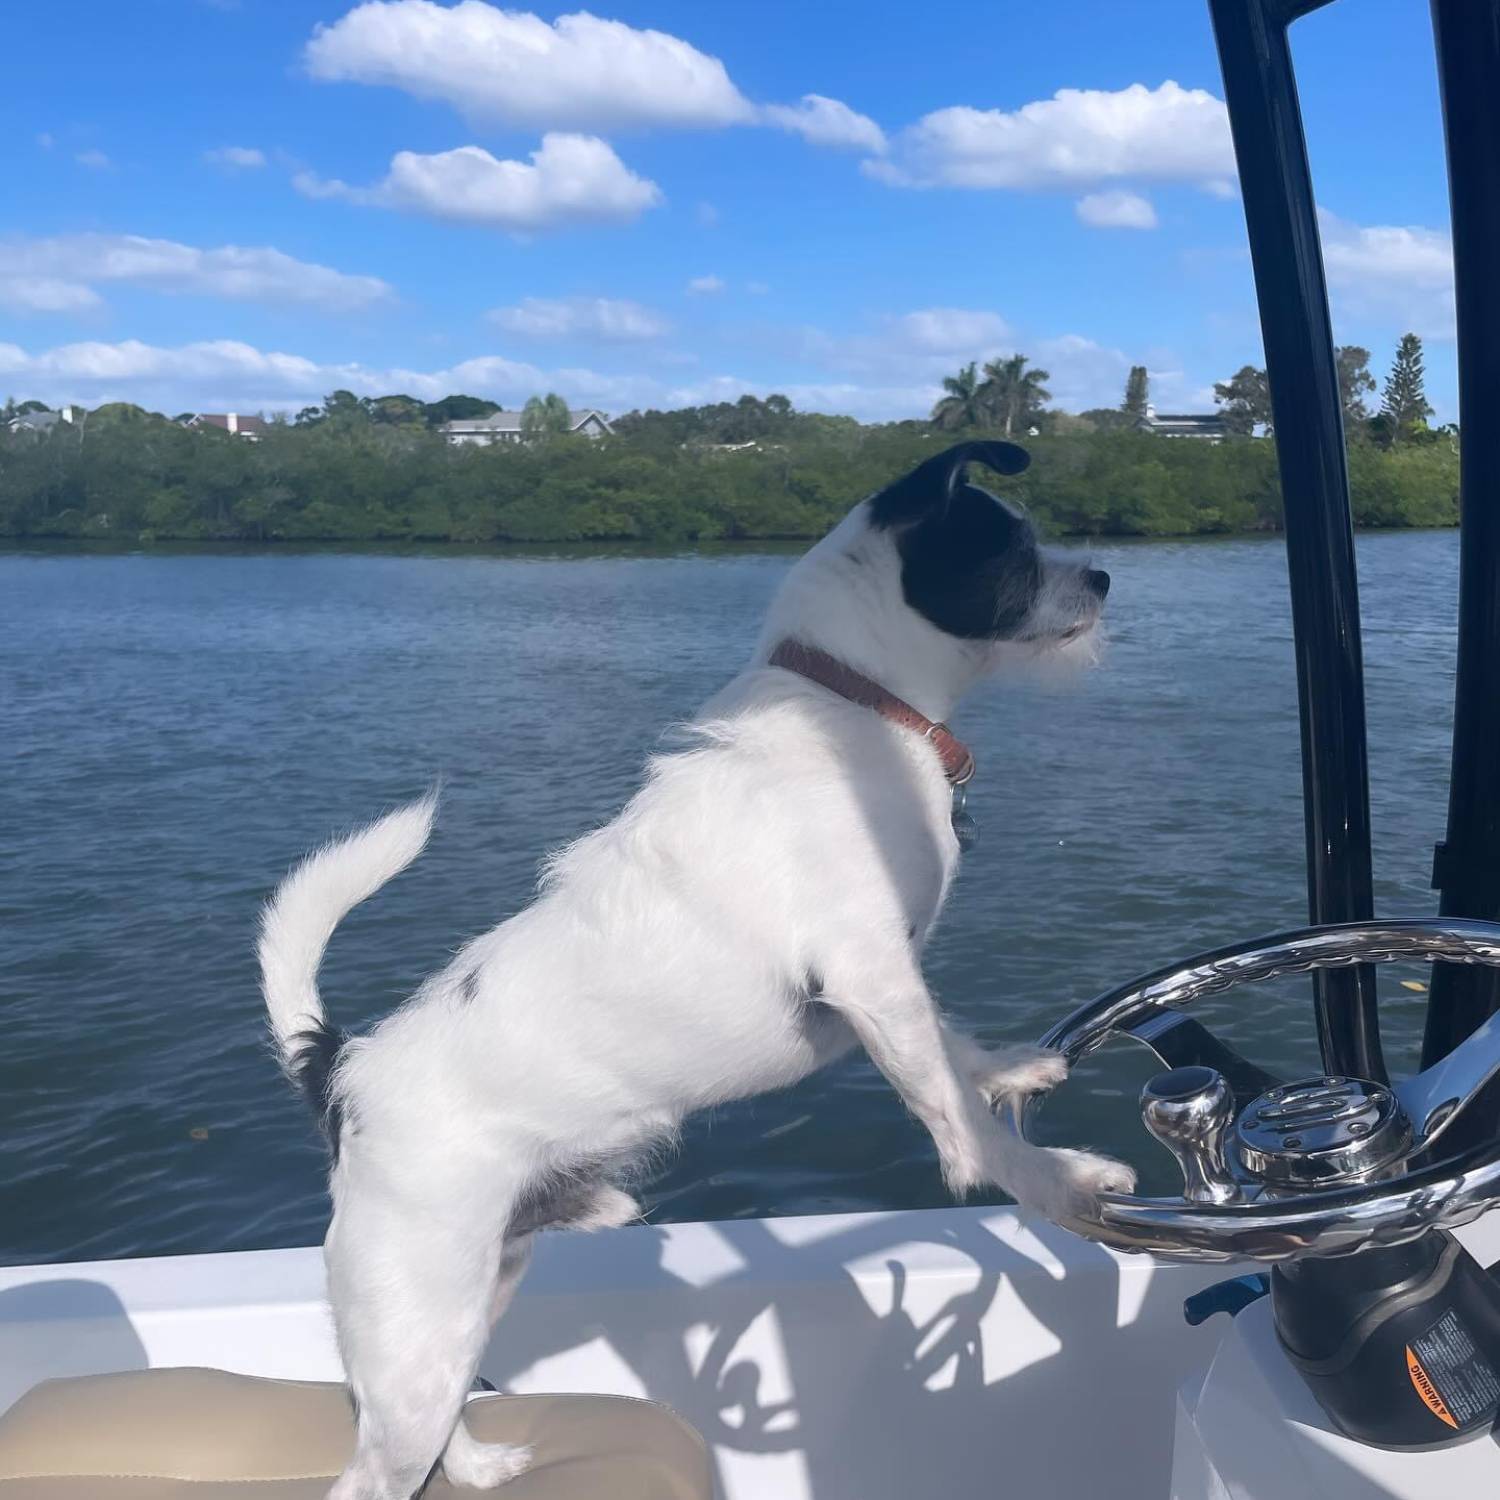 Our pup Jackson always on high alert when navigating us through the intracoastal waterways of Indian Rocks Beach.